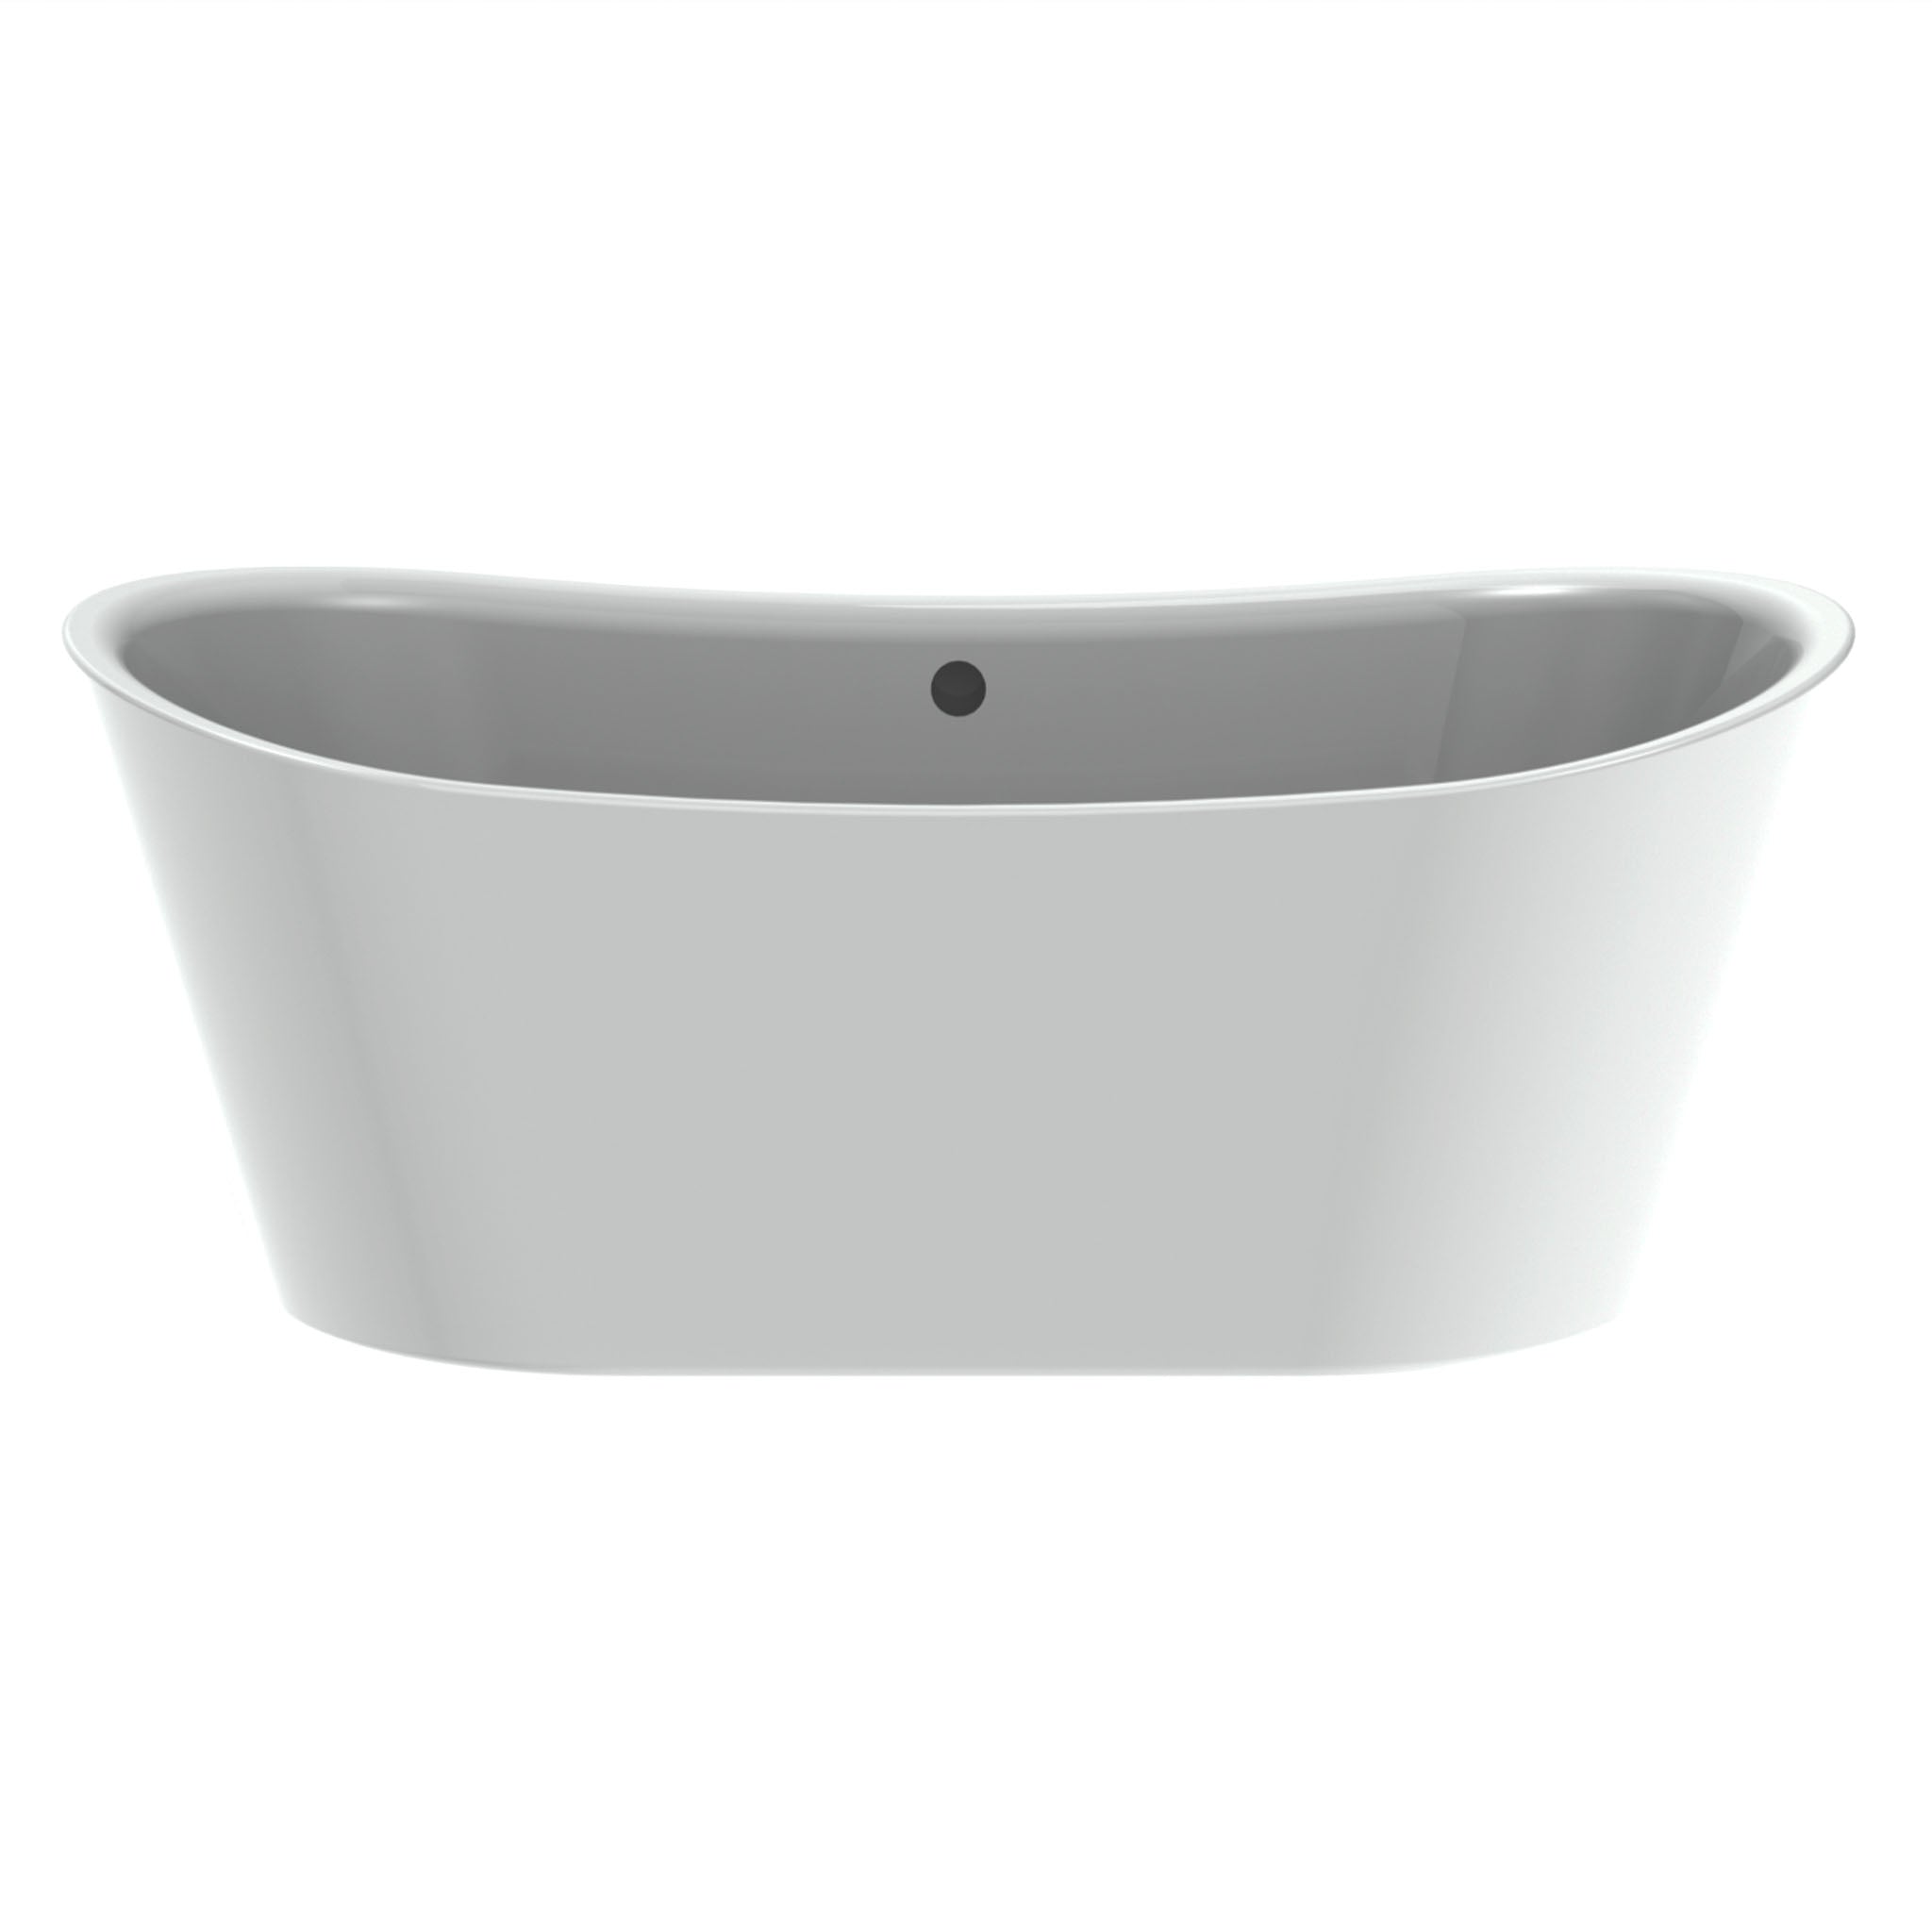 BC Designs Woburn Double Ended Acrylic Seamless Bath 1700 x 800mm